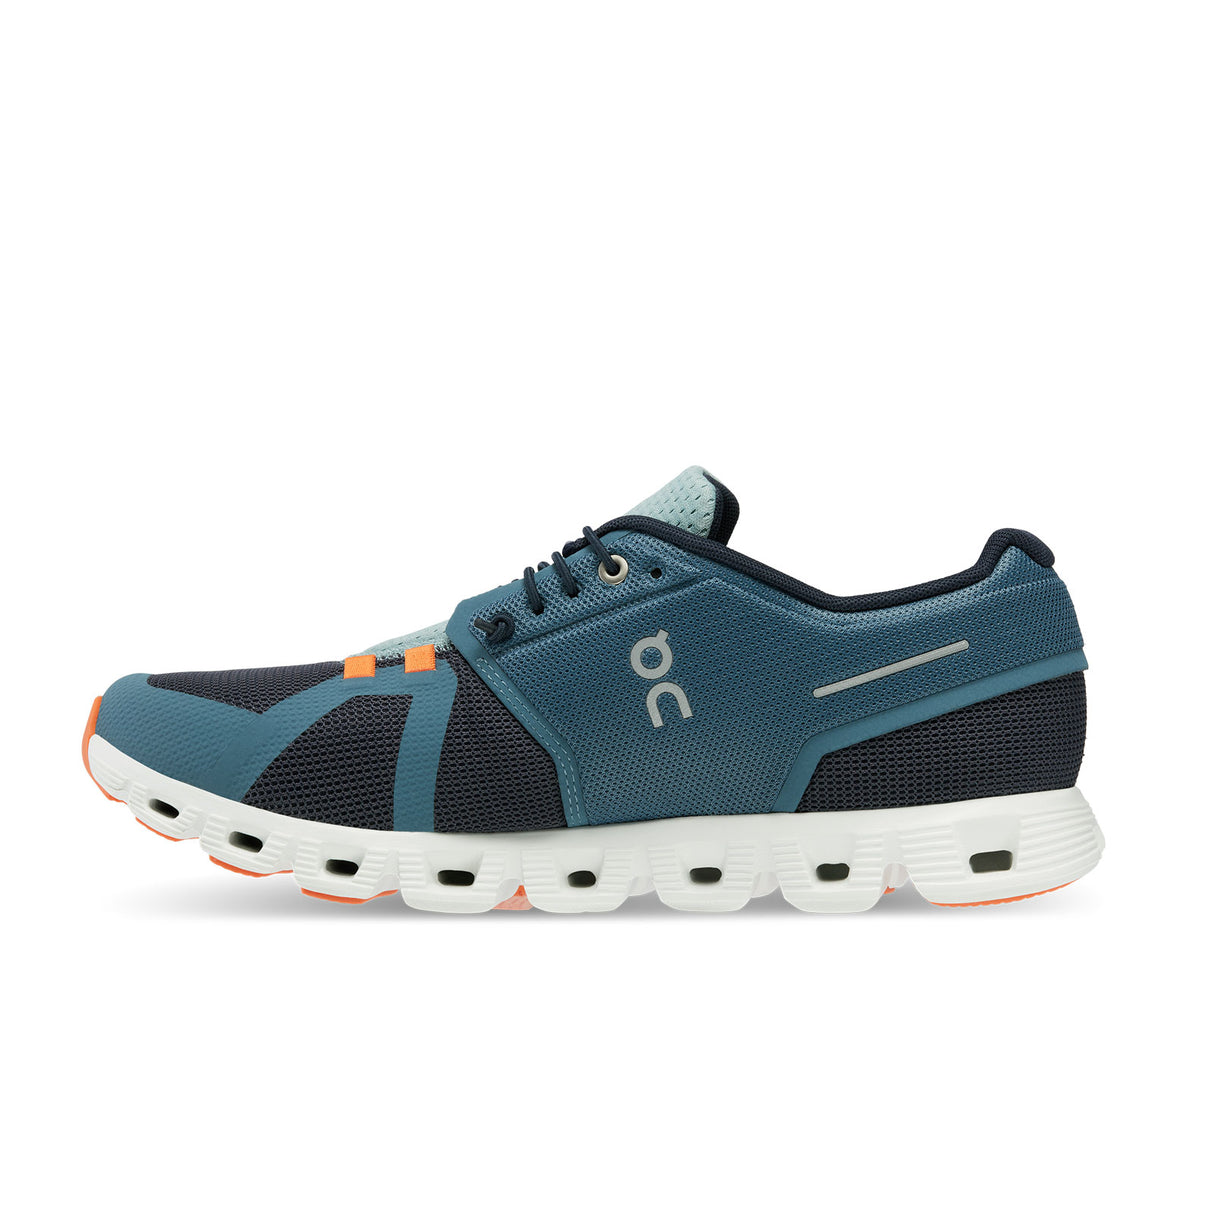 On Running Cloud 5 Push Running Shoe (Men) - Dust/Ink Athletic - Running - The Heel Shoe Fitters